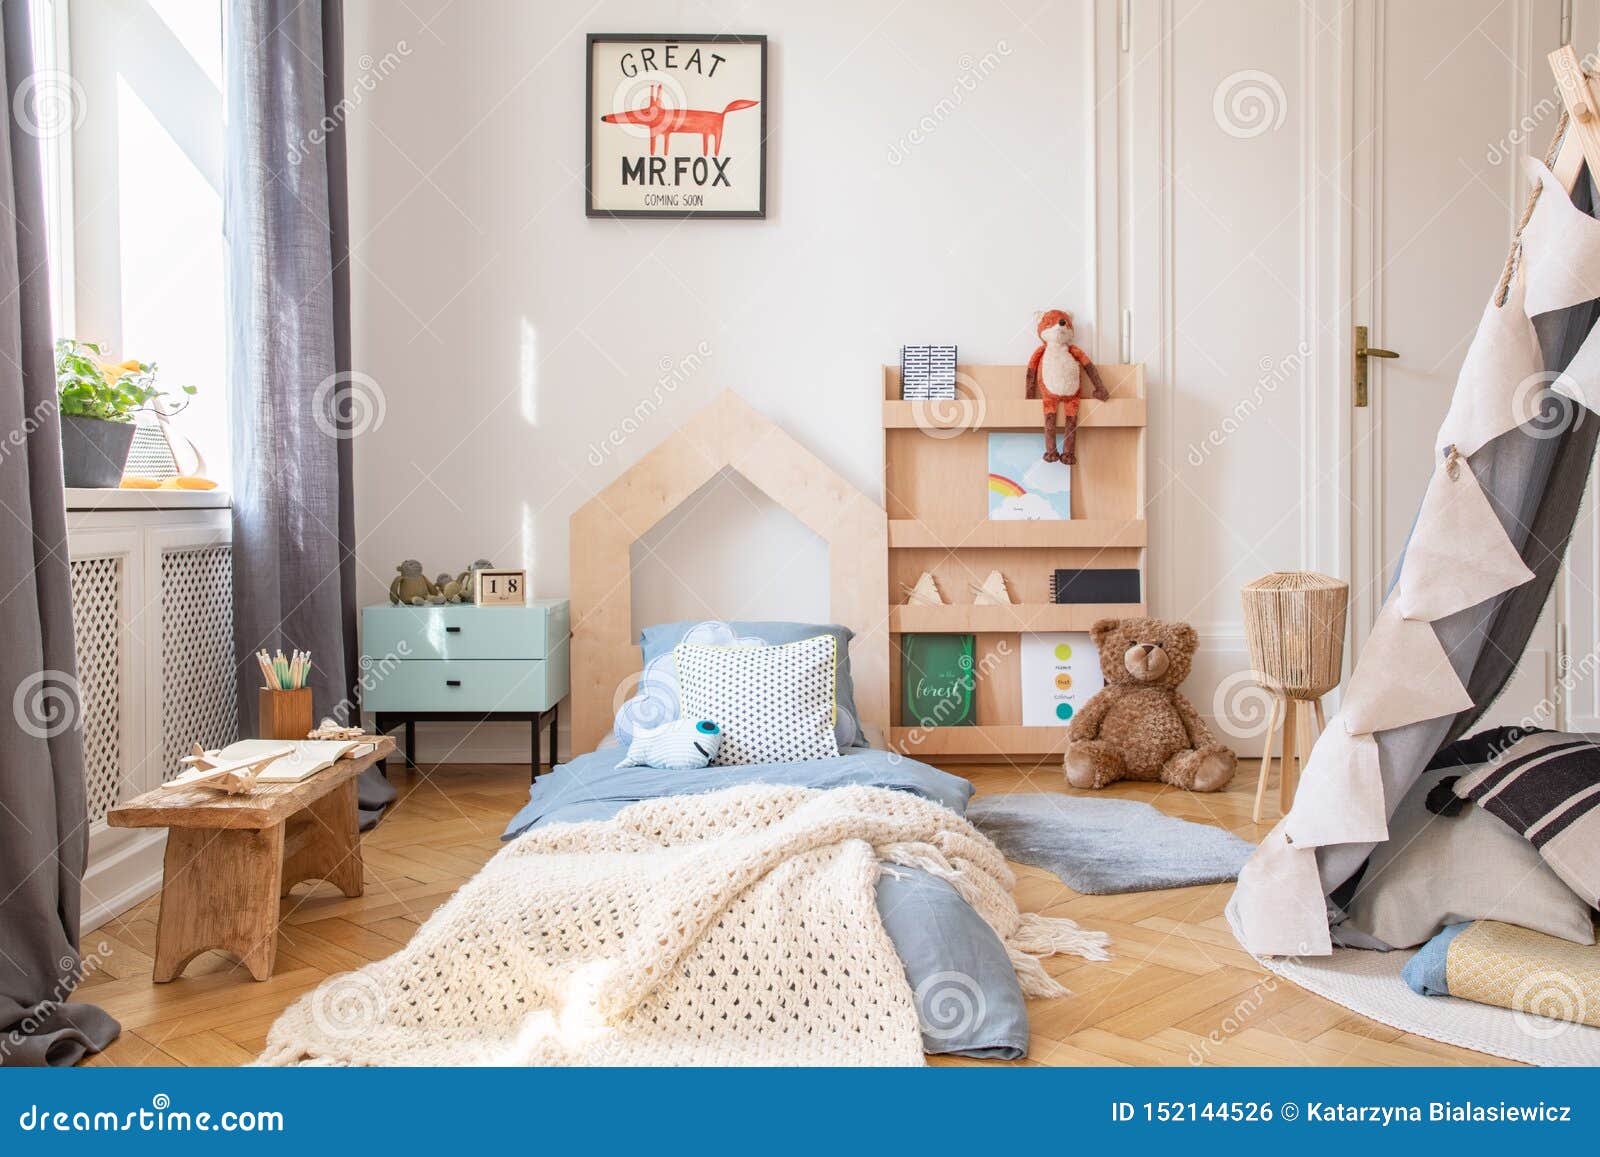 Download 140 Poster Mockup Kids Room Photos Free Royalty Free Stock Photos From Dreamstime